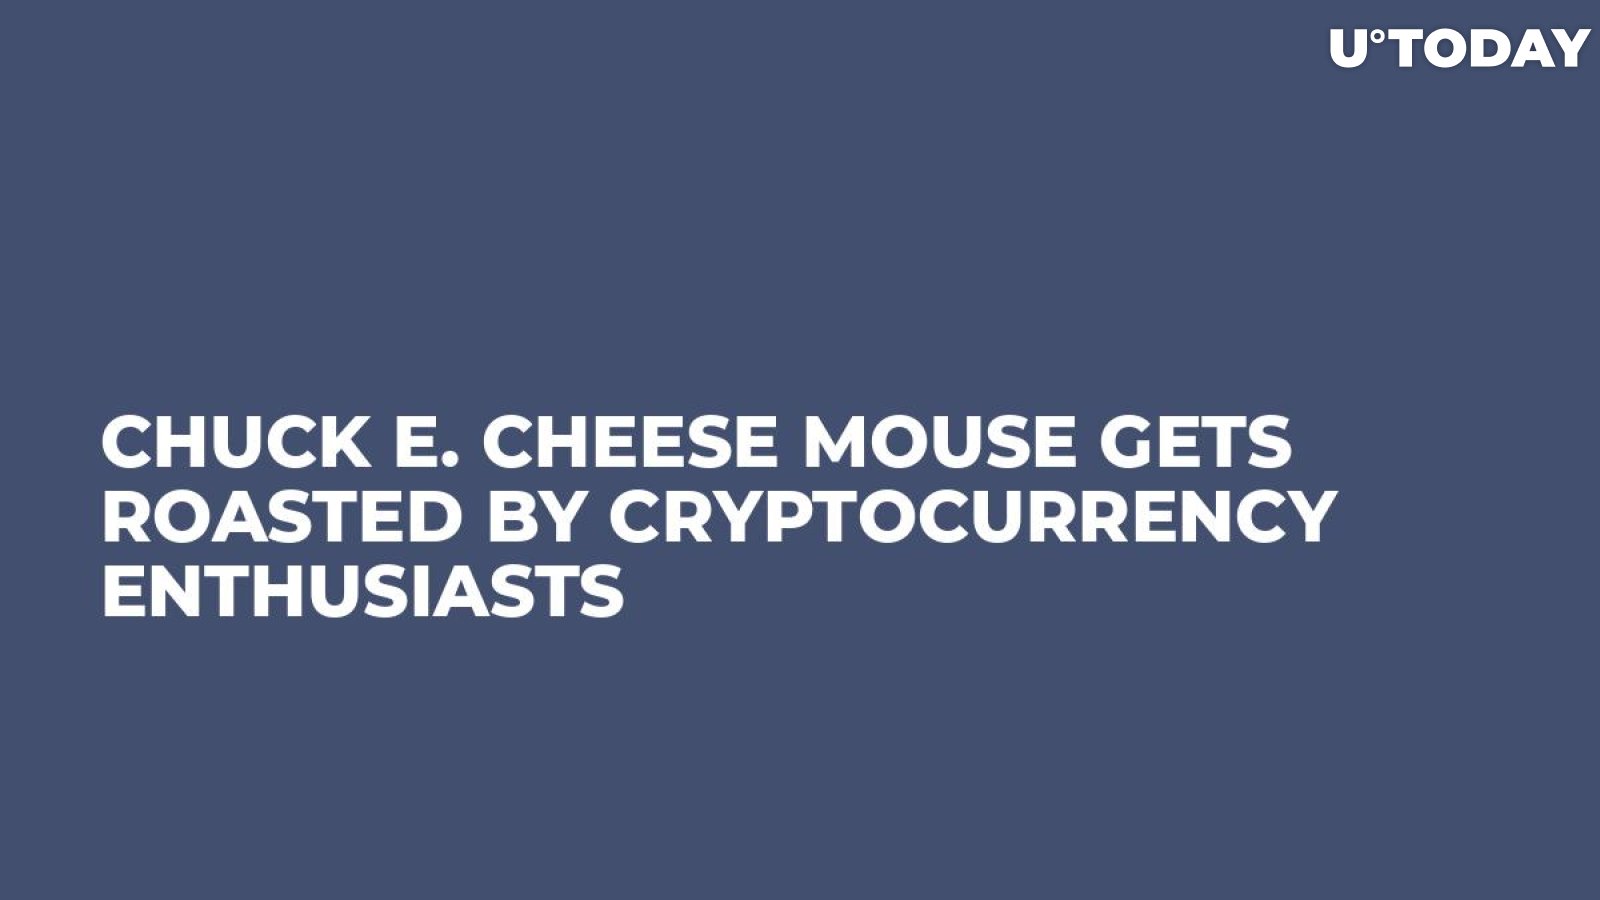 Chuck E. Cheese Mouse Gets Roasted by Cryptocurrency Enthusiasts